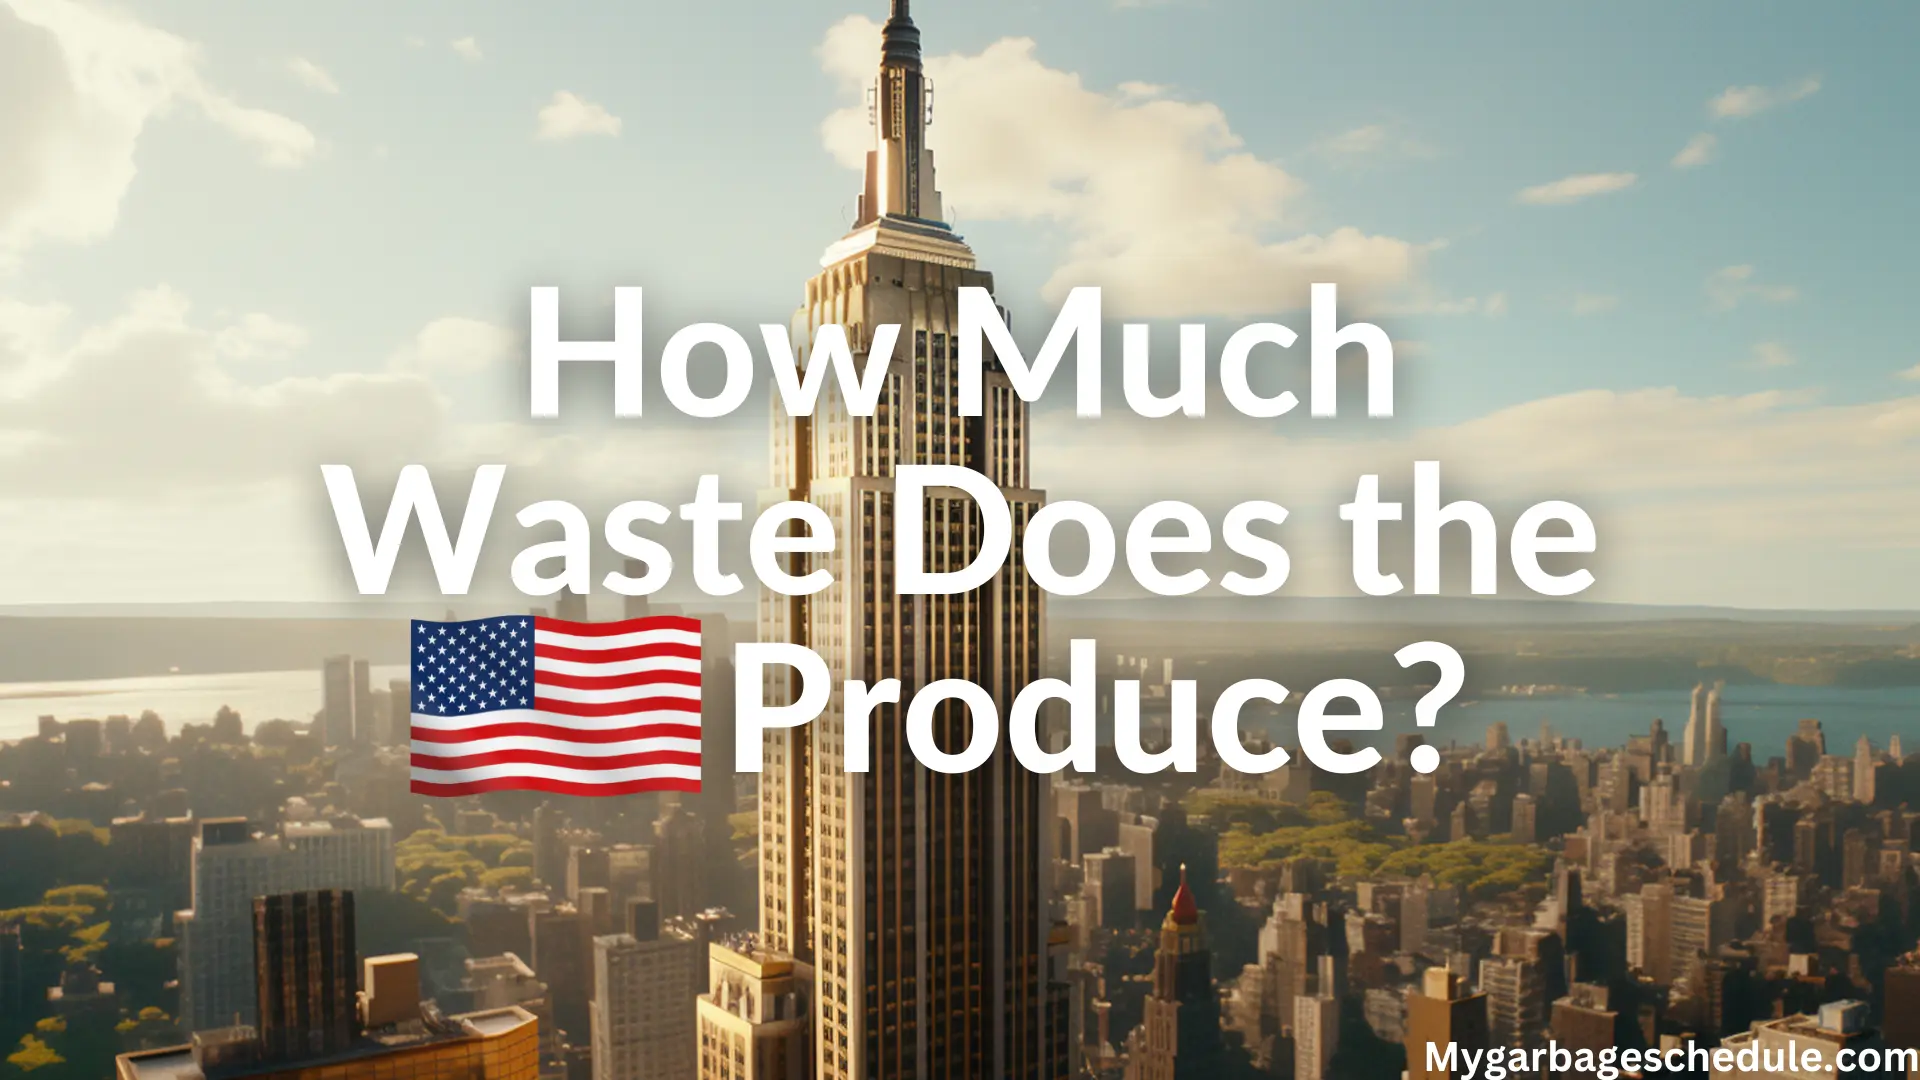 How Much Waste Does the US Produce?